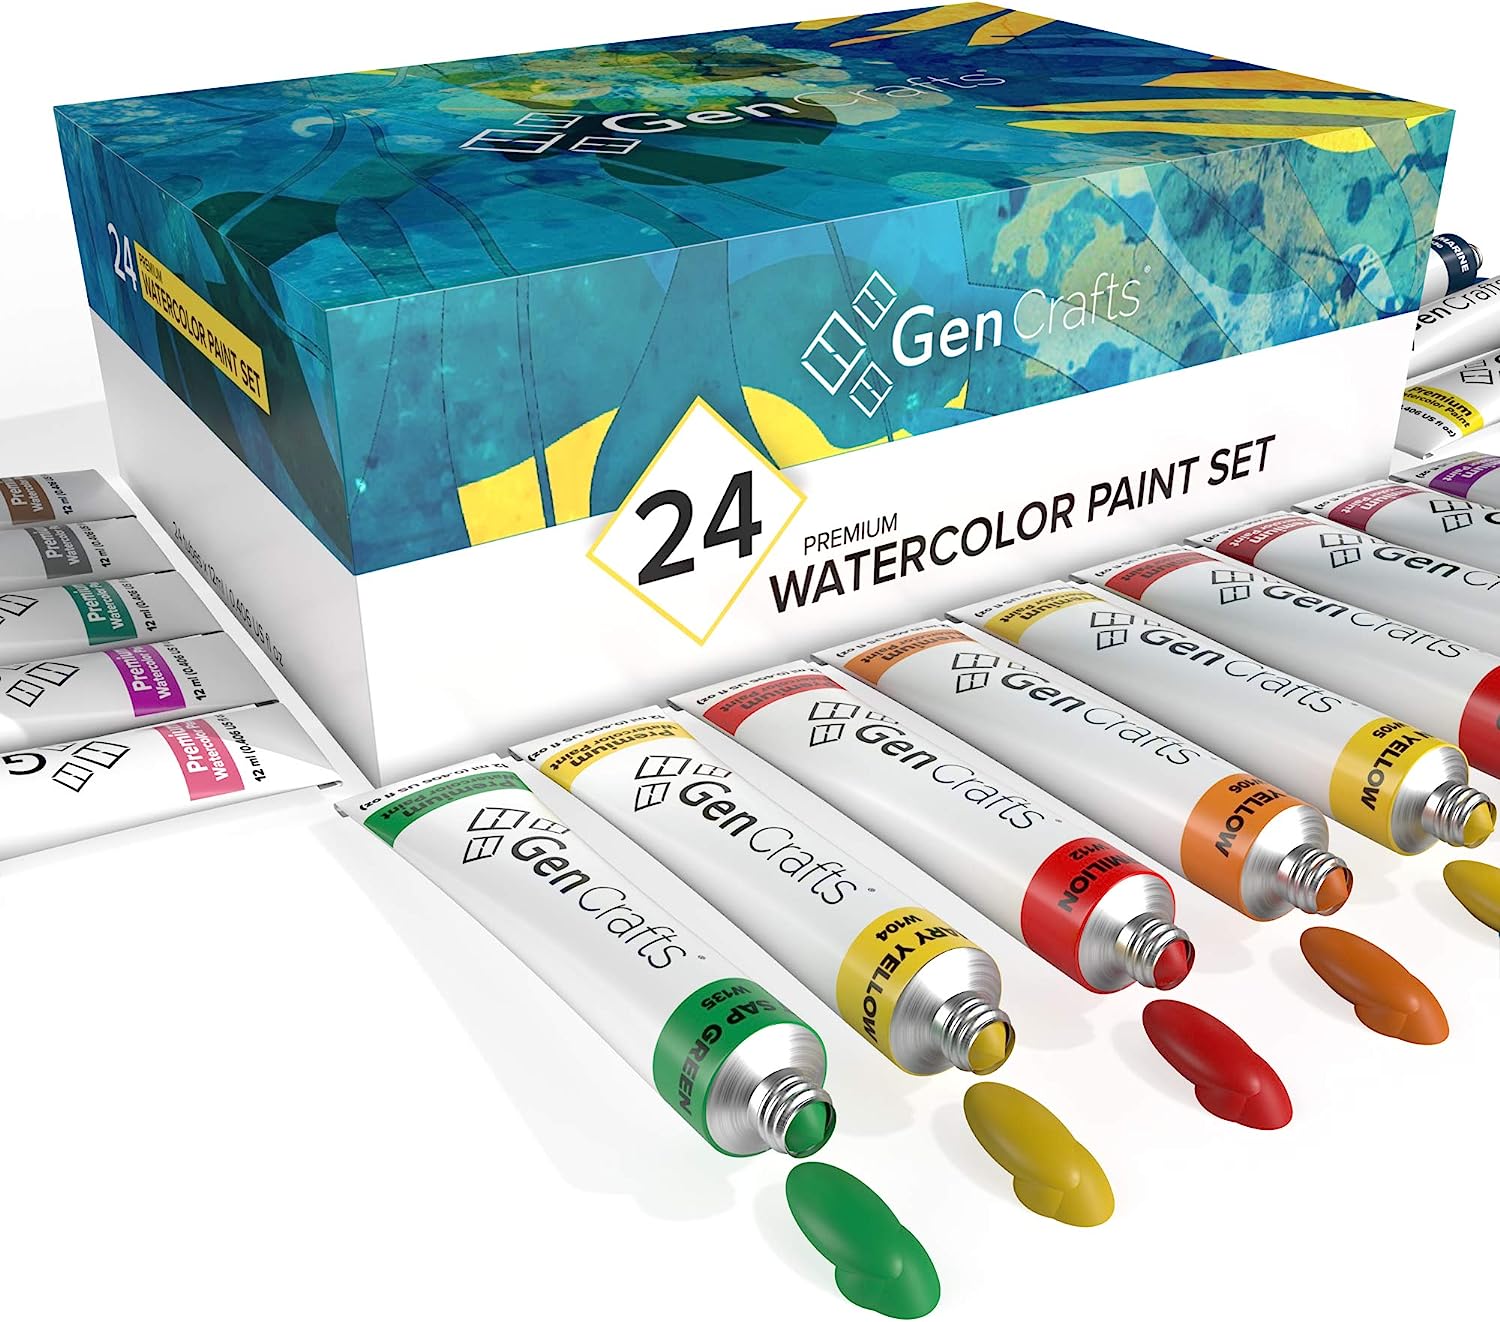 Gencrafts Watercolor Paint Tubes Set of 24